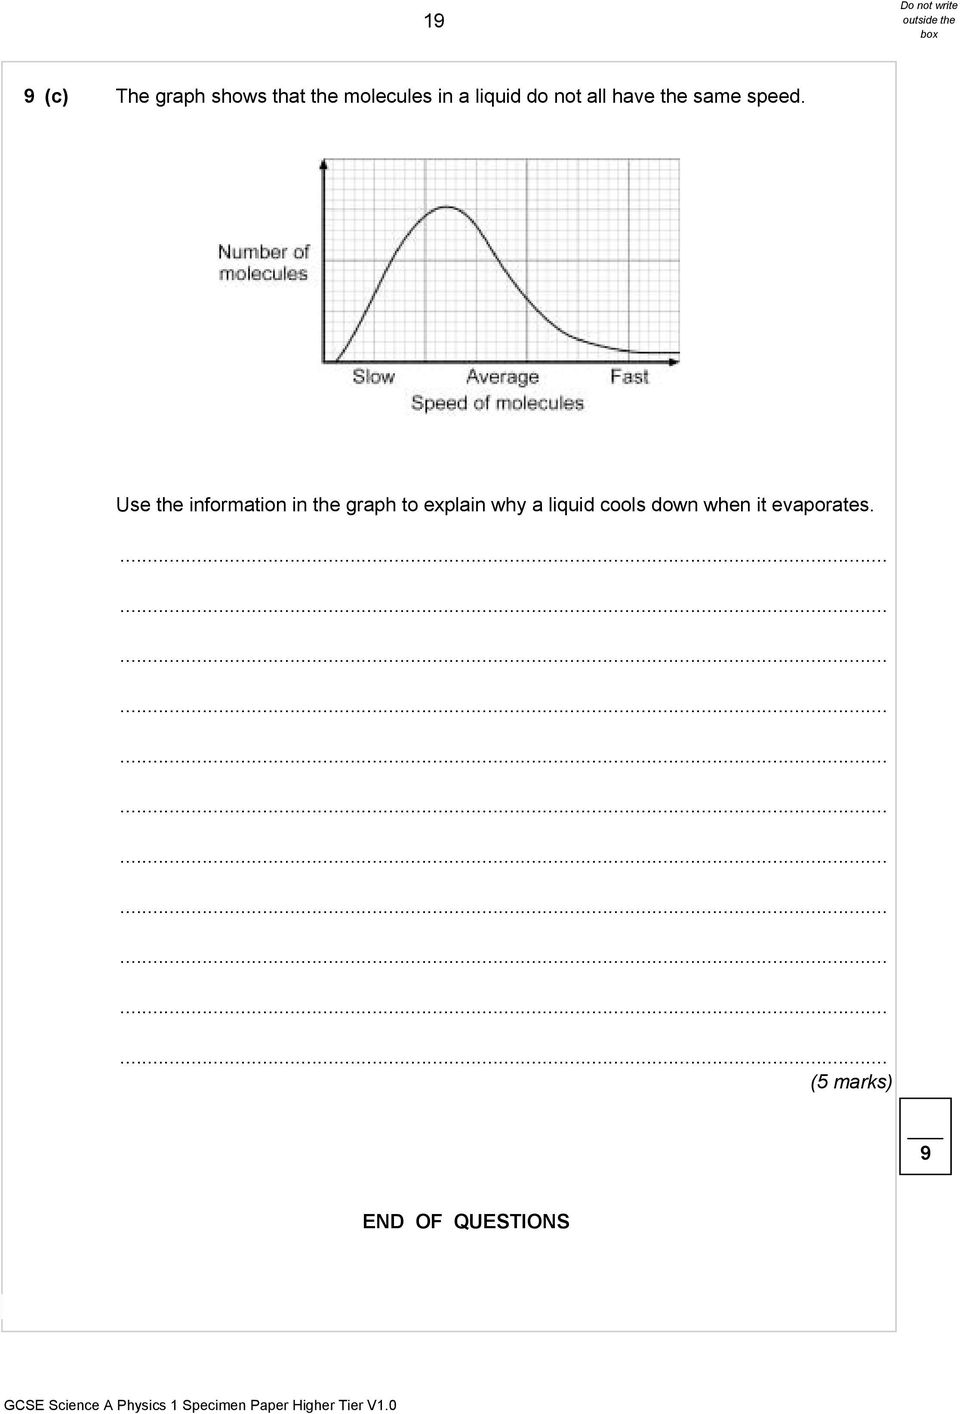 Use the information in the graph to explain why a